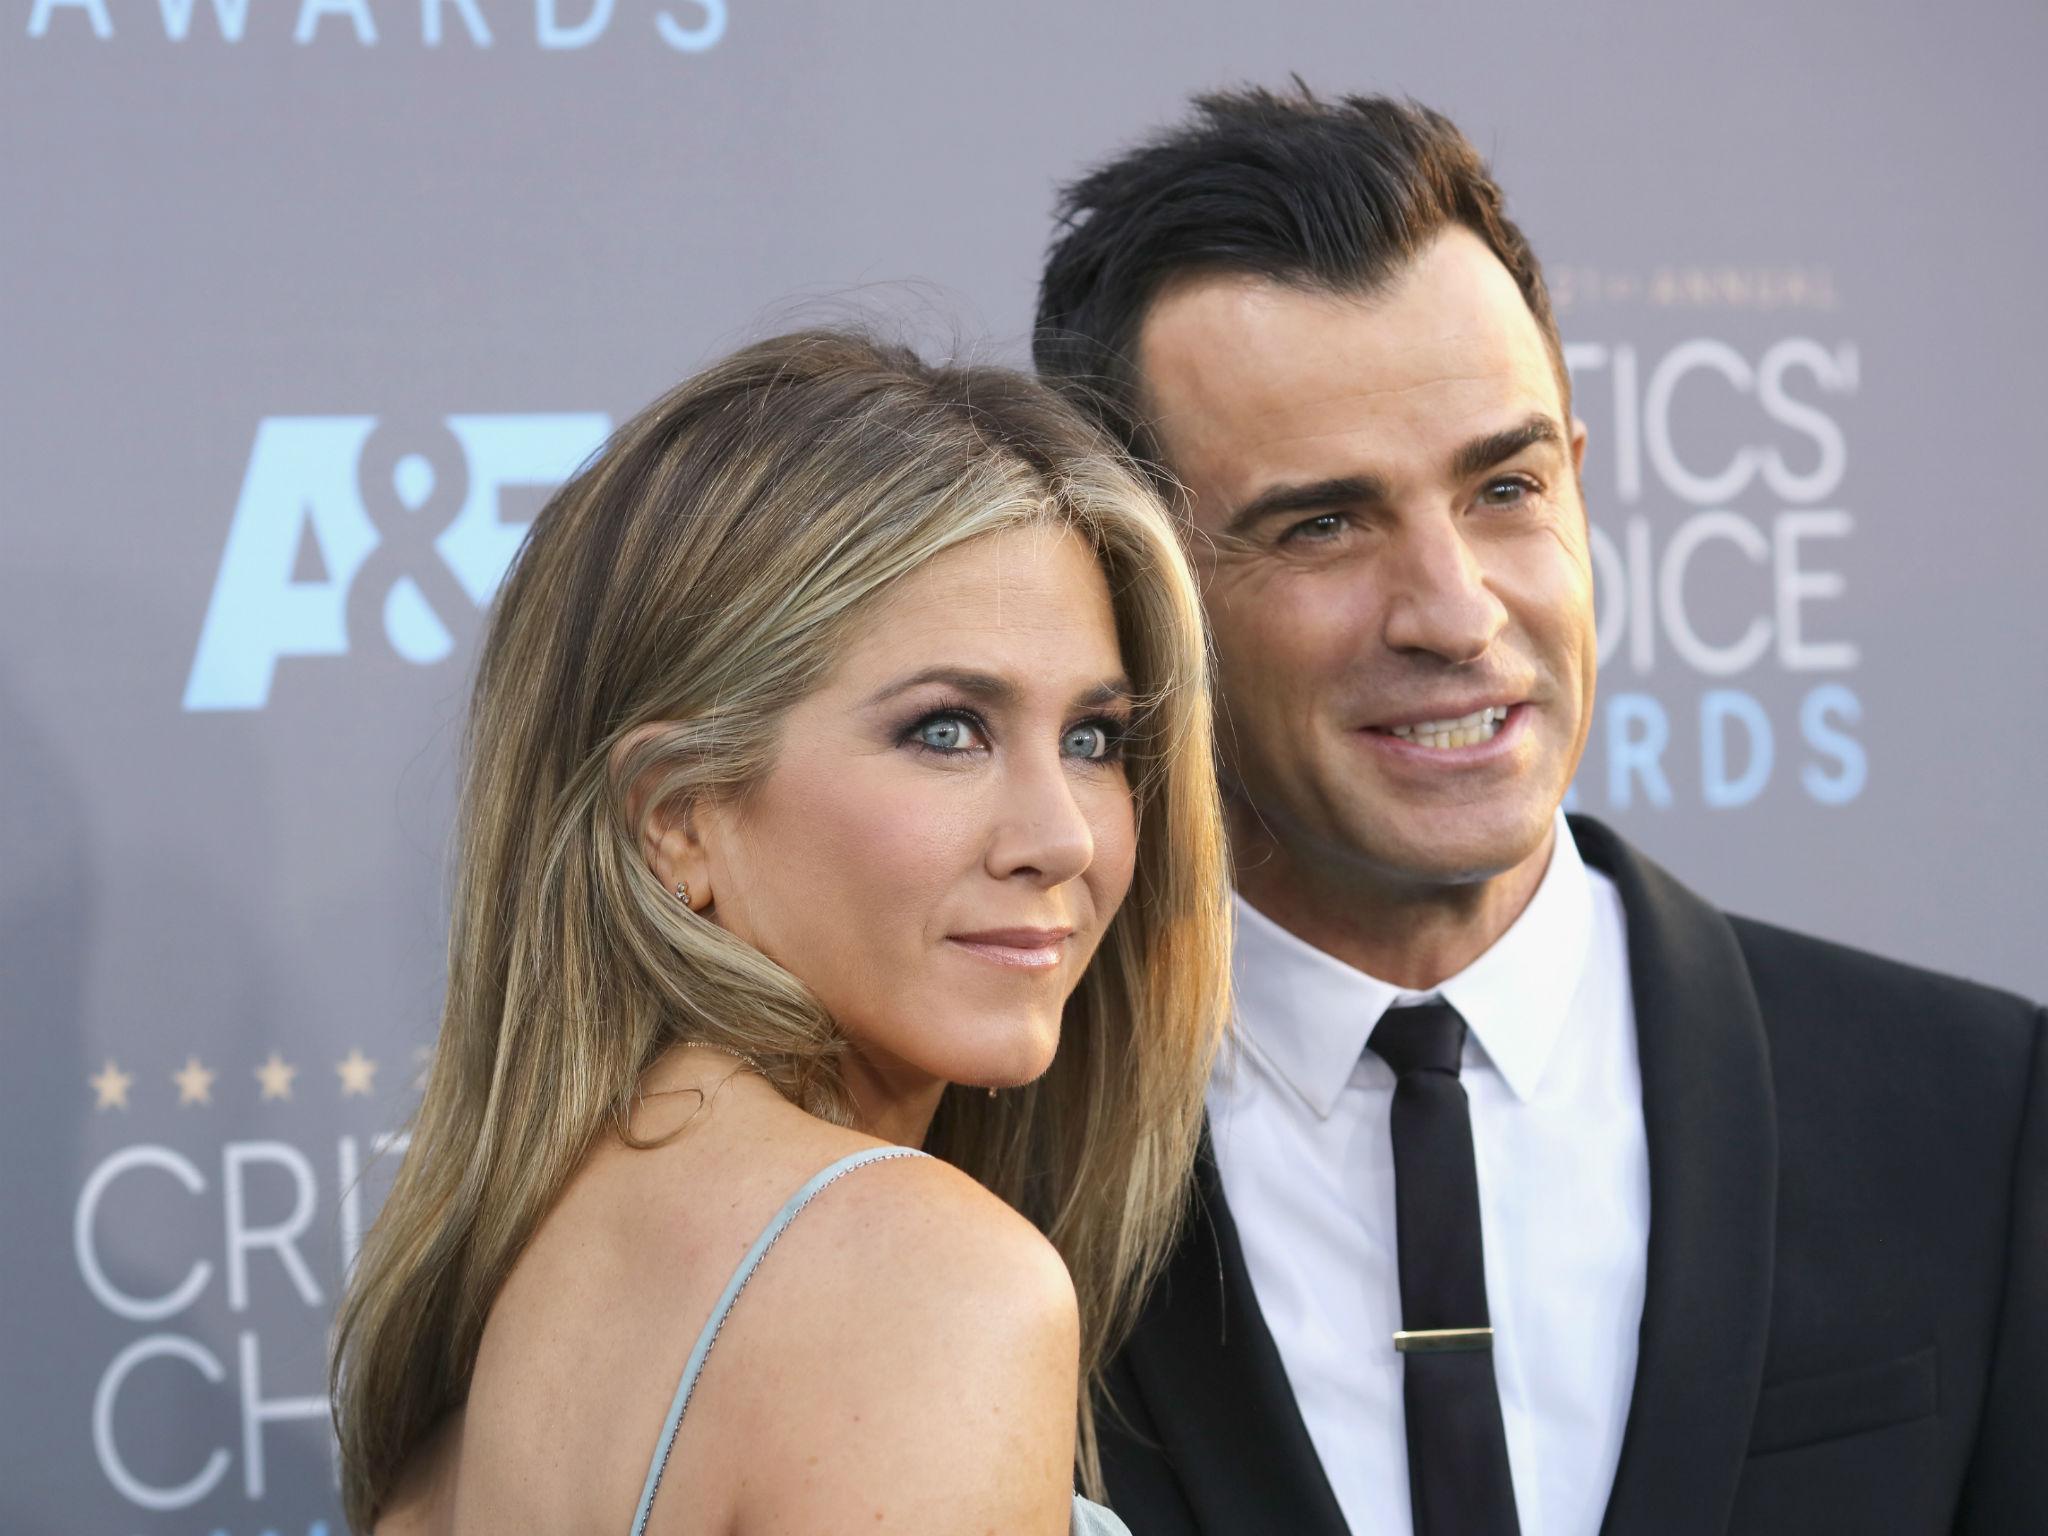 Jennifer Anistons husband Justin Theroux reflects on difficulties of media attention on their relationship The Independent The Independent pic